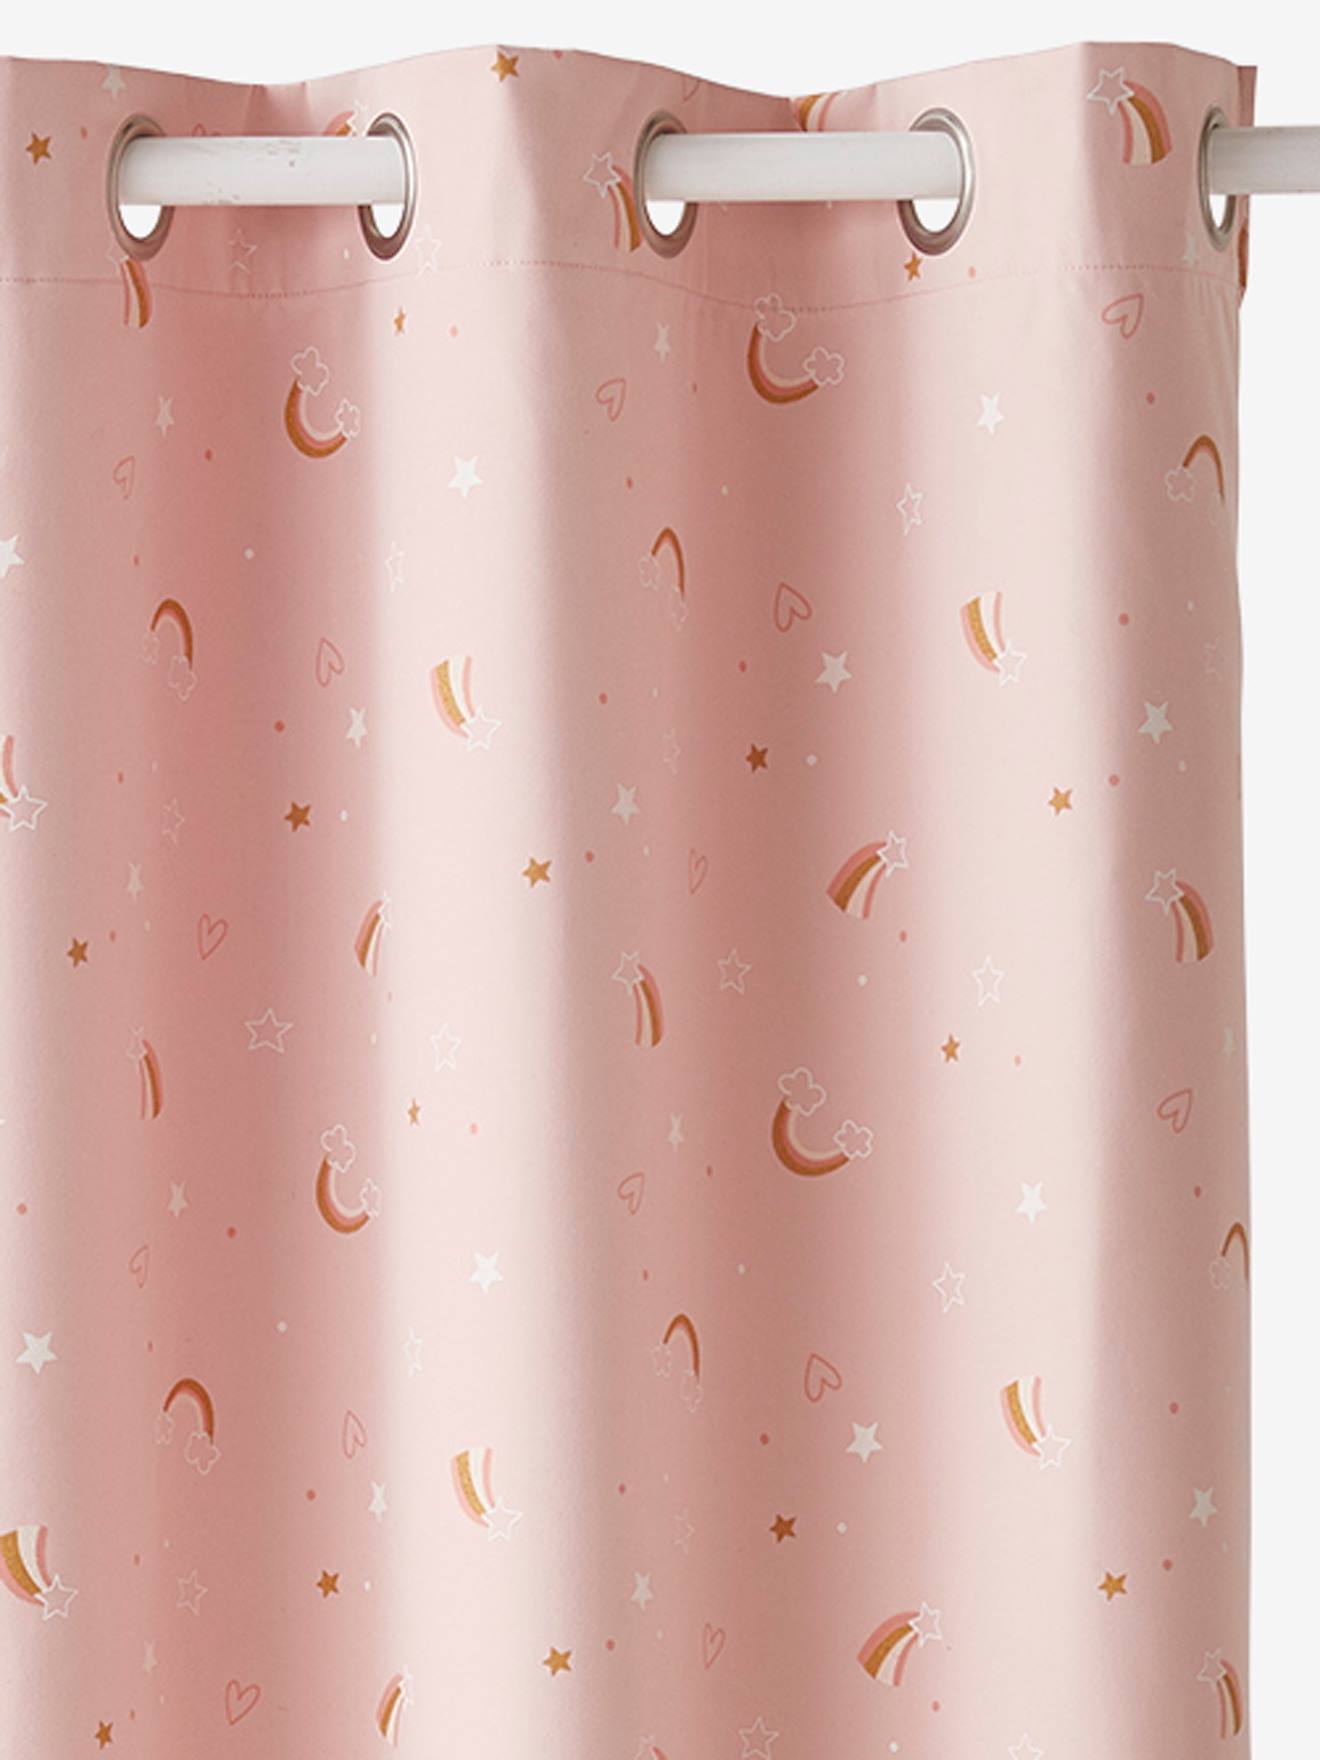 Glow In The Dark Blackout Curtain, Sheer Pink Shower Curtain